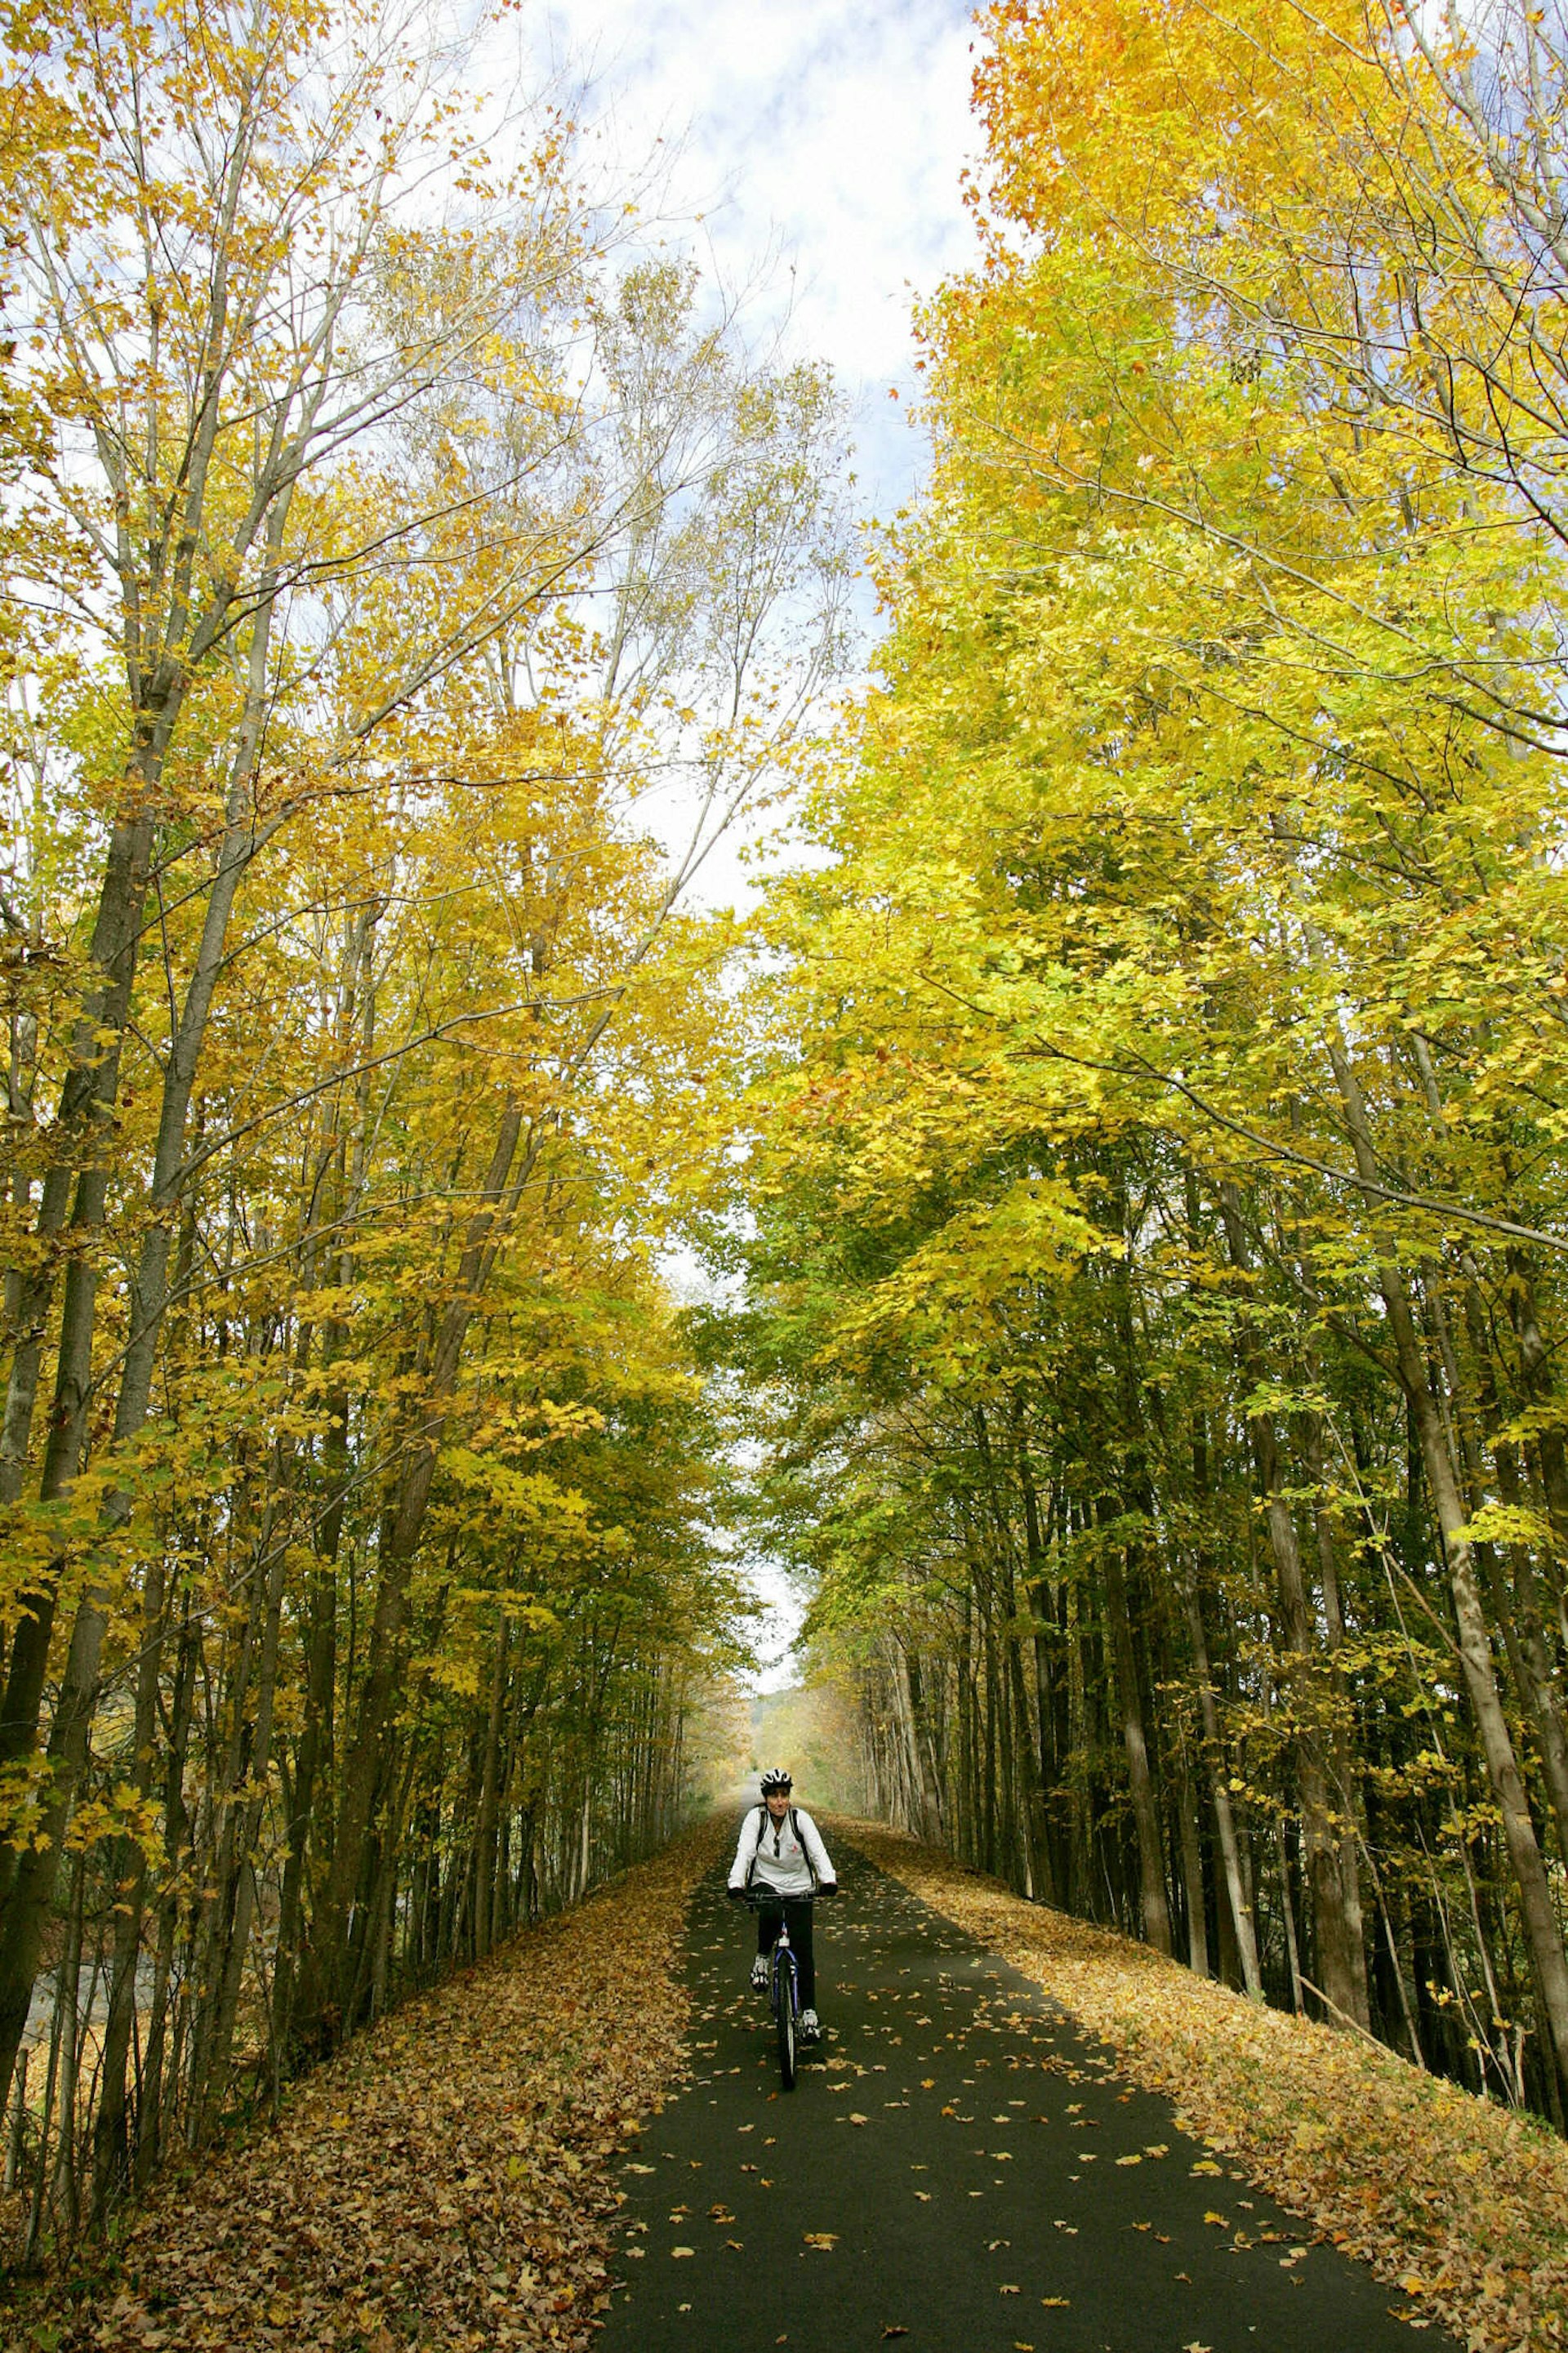 The Hudson Valley Trail is one of three sections on the Empire State Trail